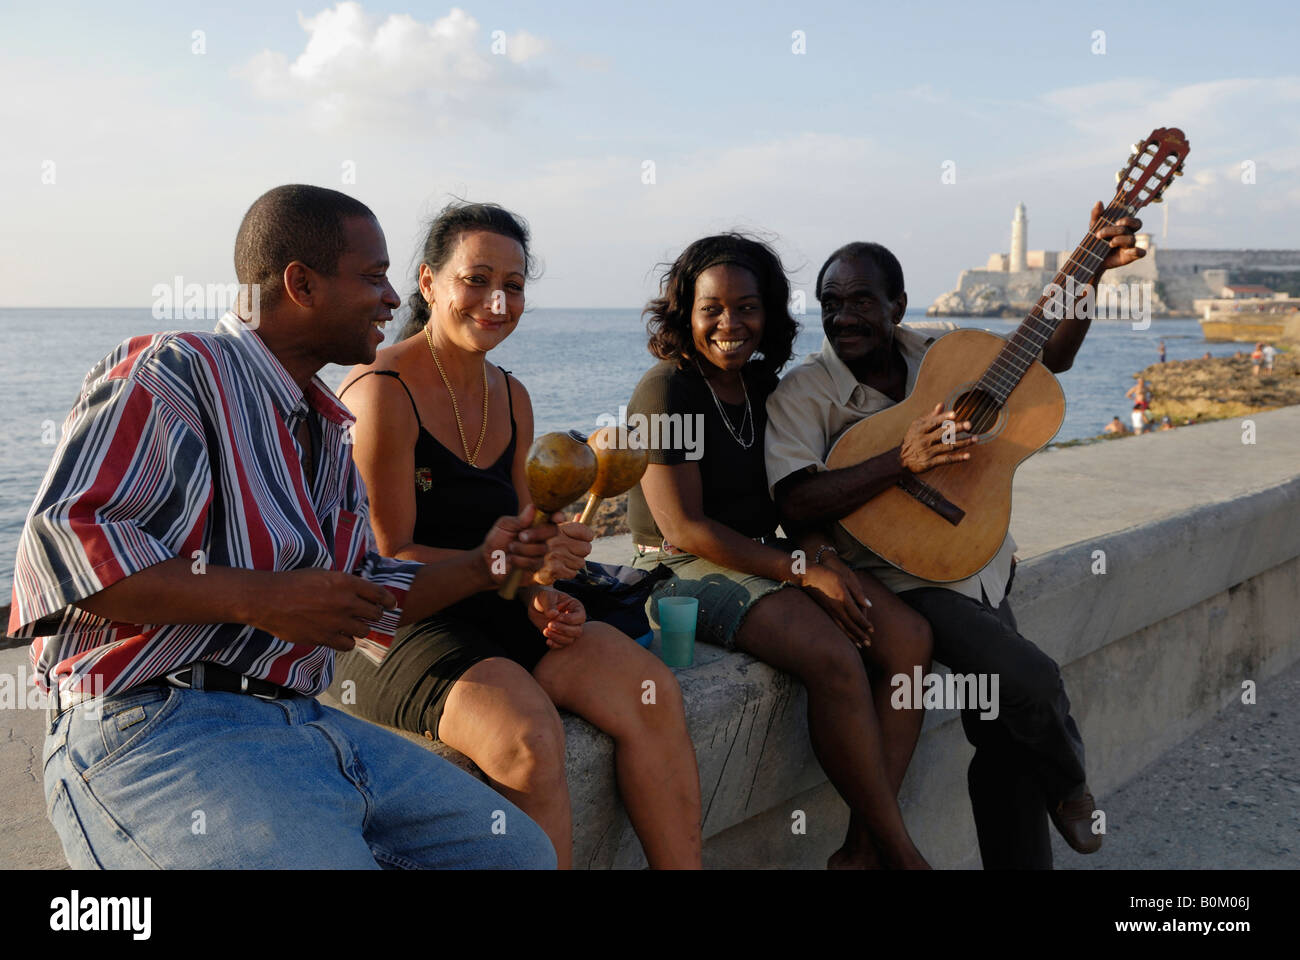 Two women and two men sitting on a wall and playing their instruments at the Melacon Boulevard in Havana Cuba April 2007 Stock Photo